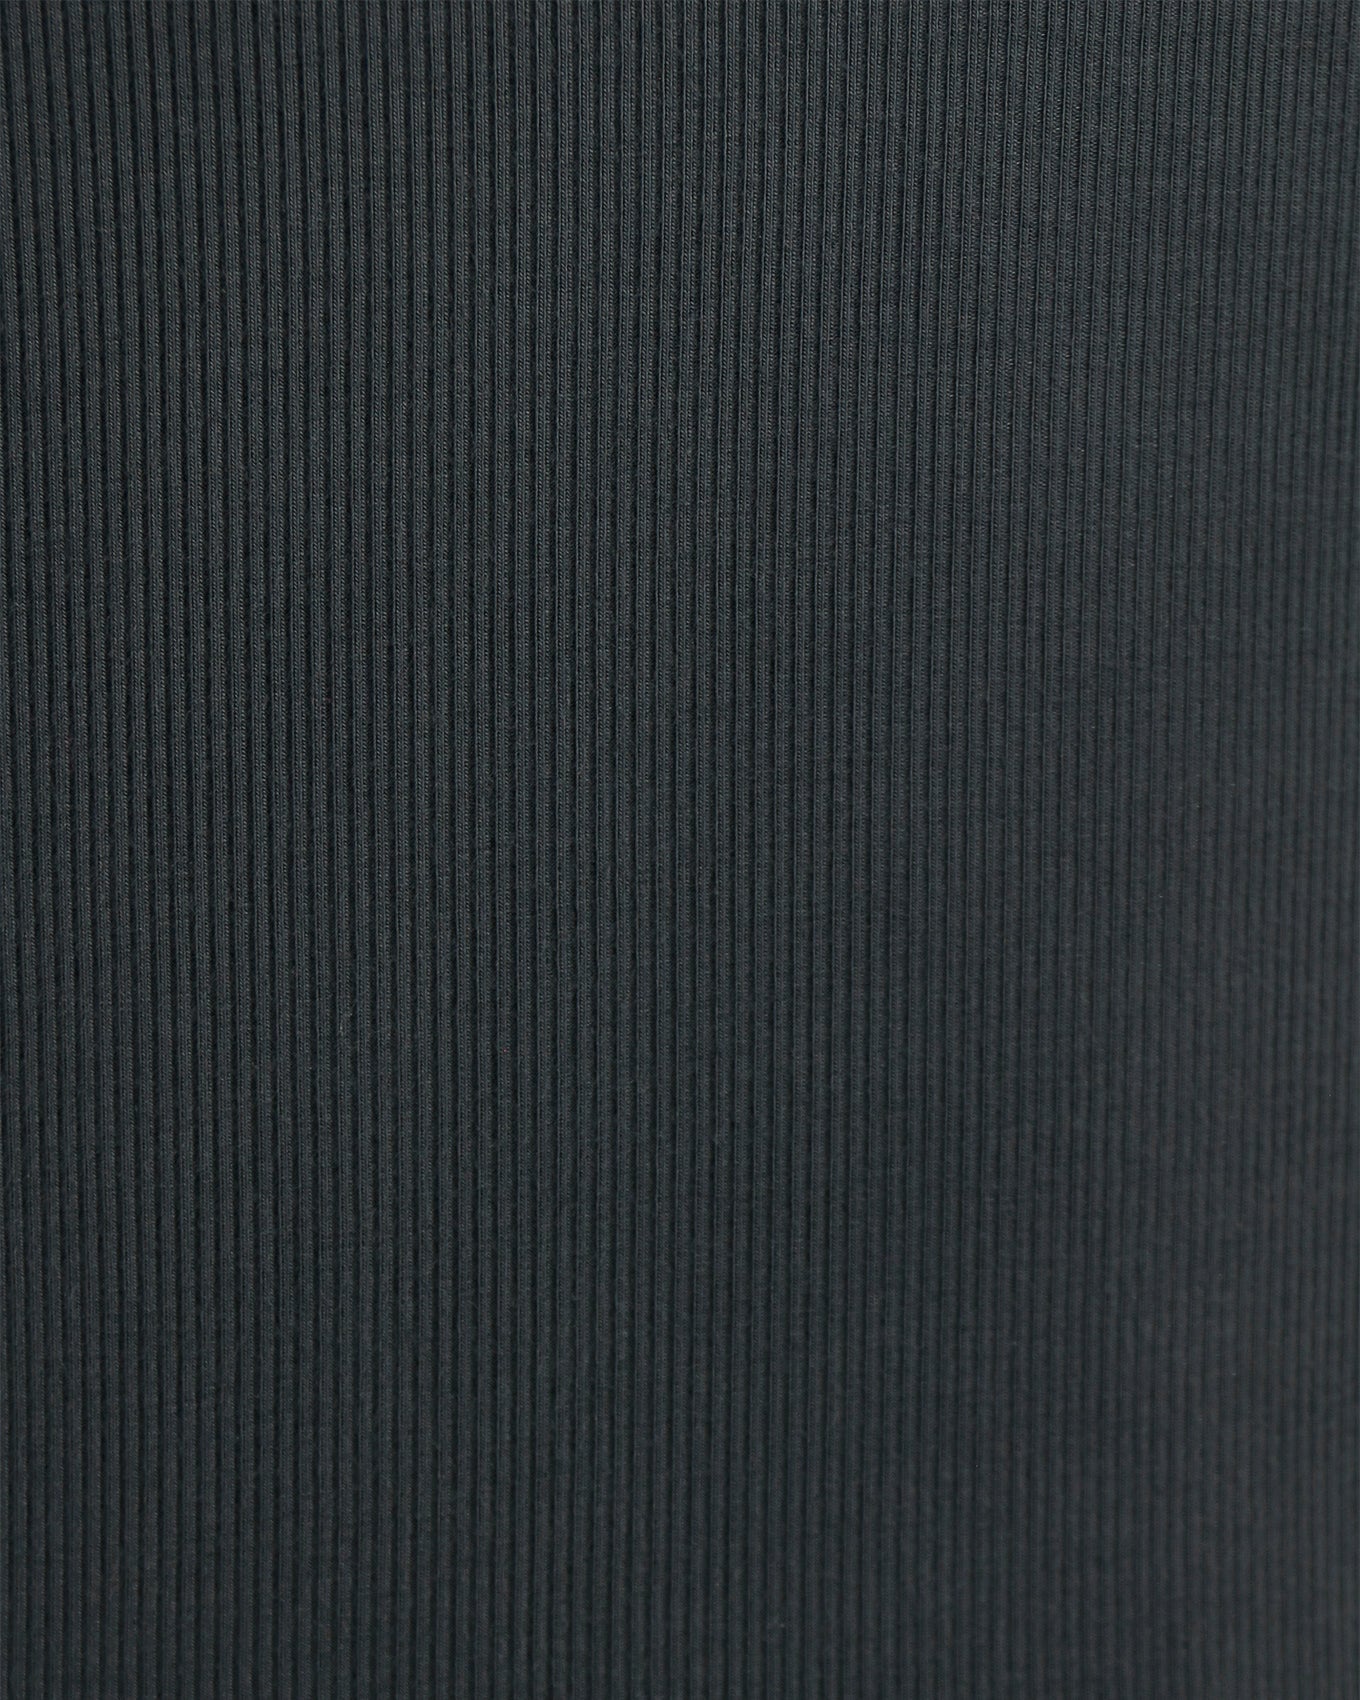 Fabric view of Soft Black Lightweight Ribbed Cardigan